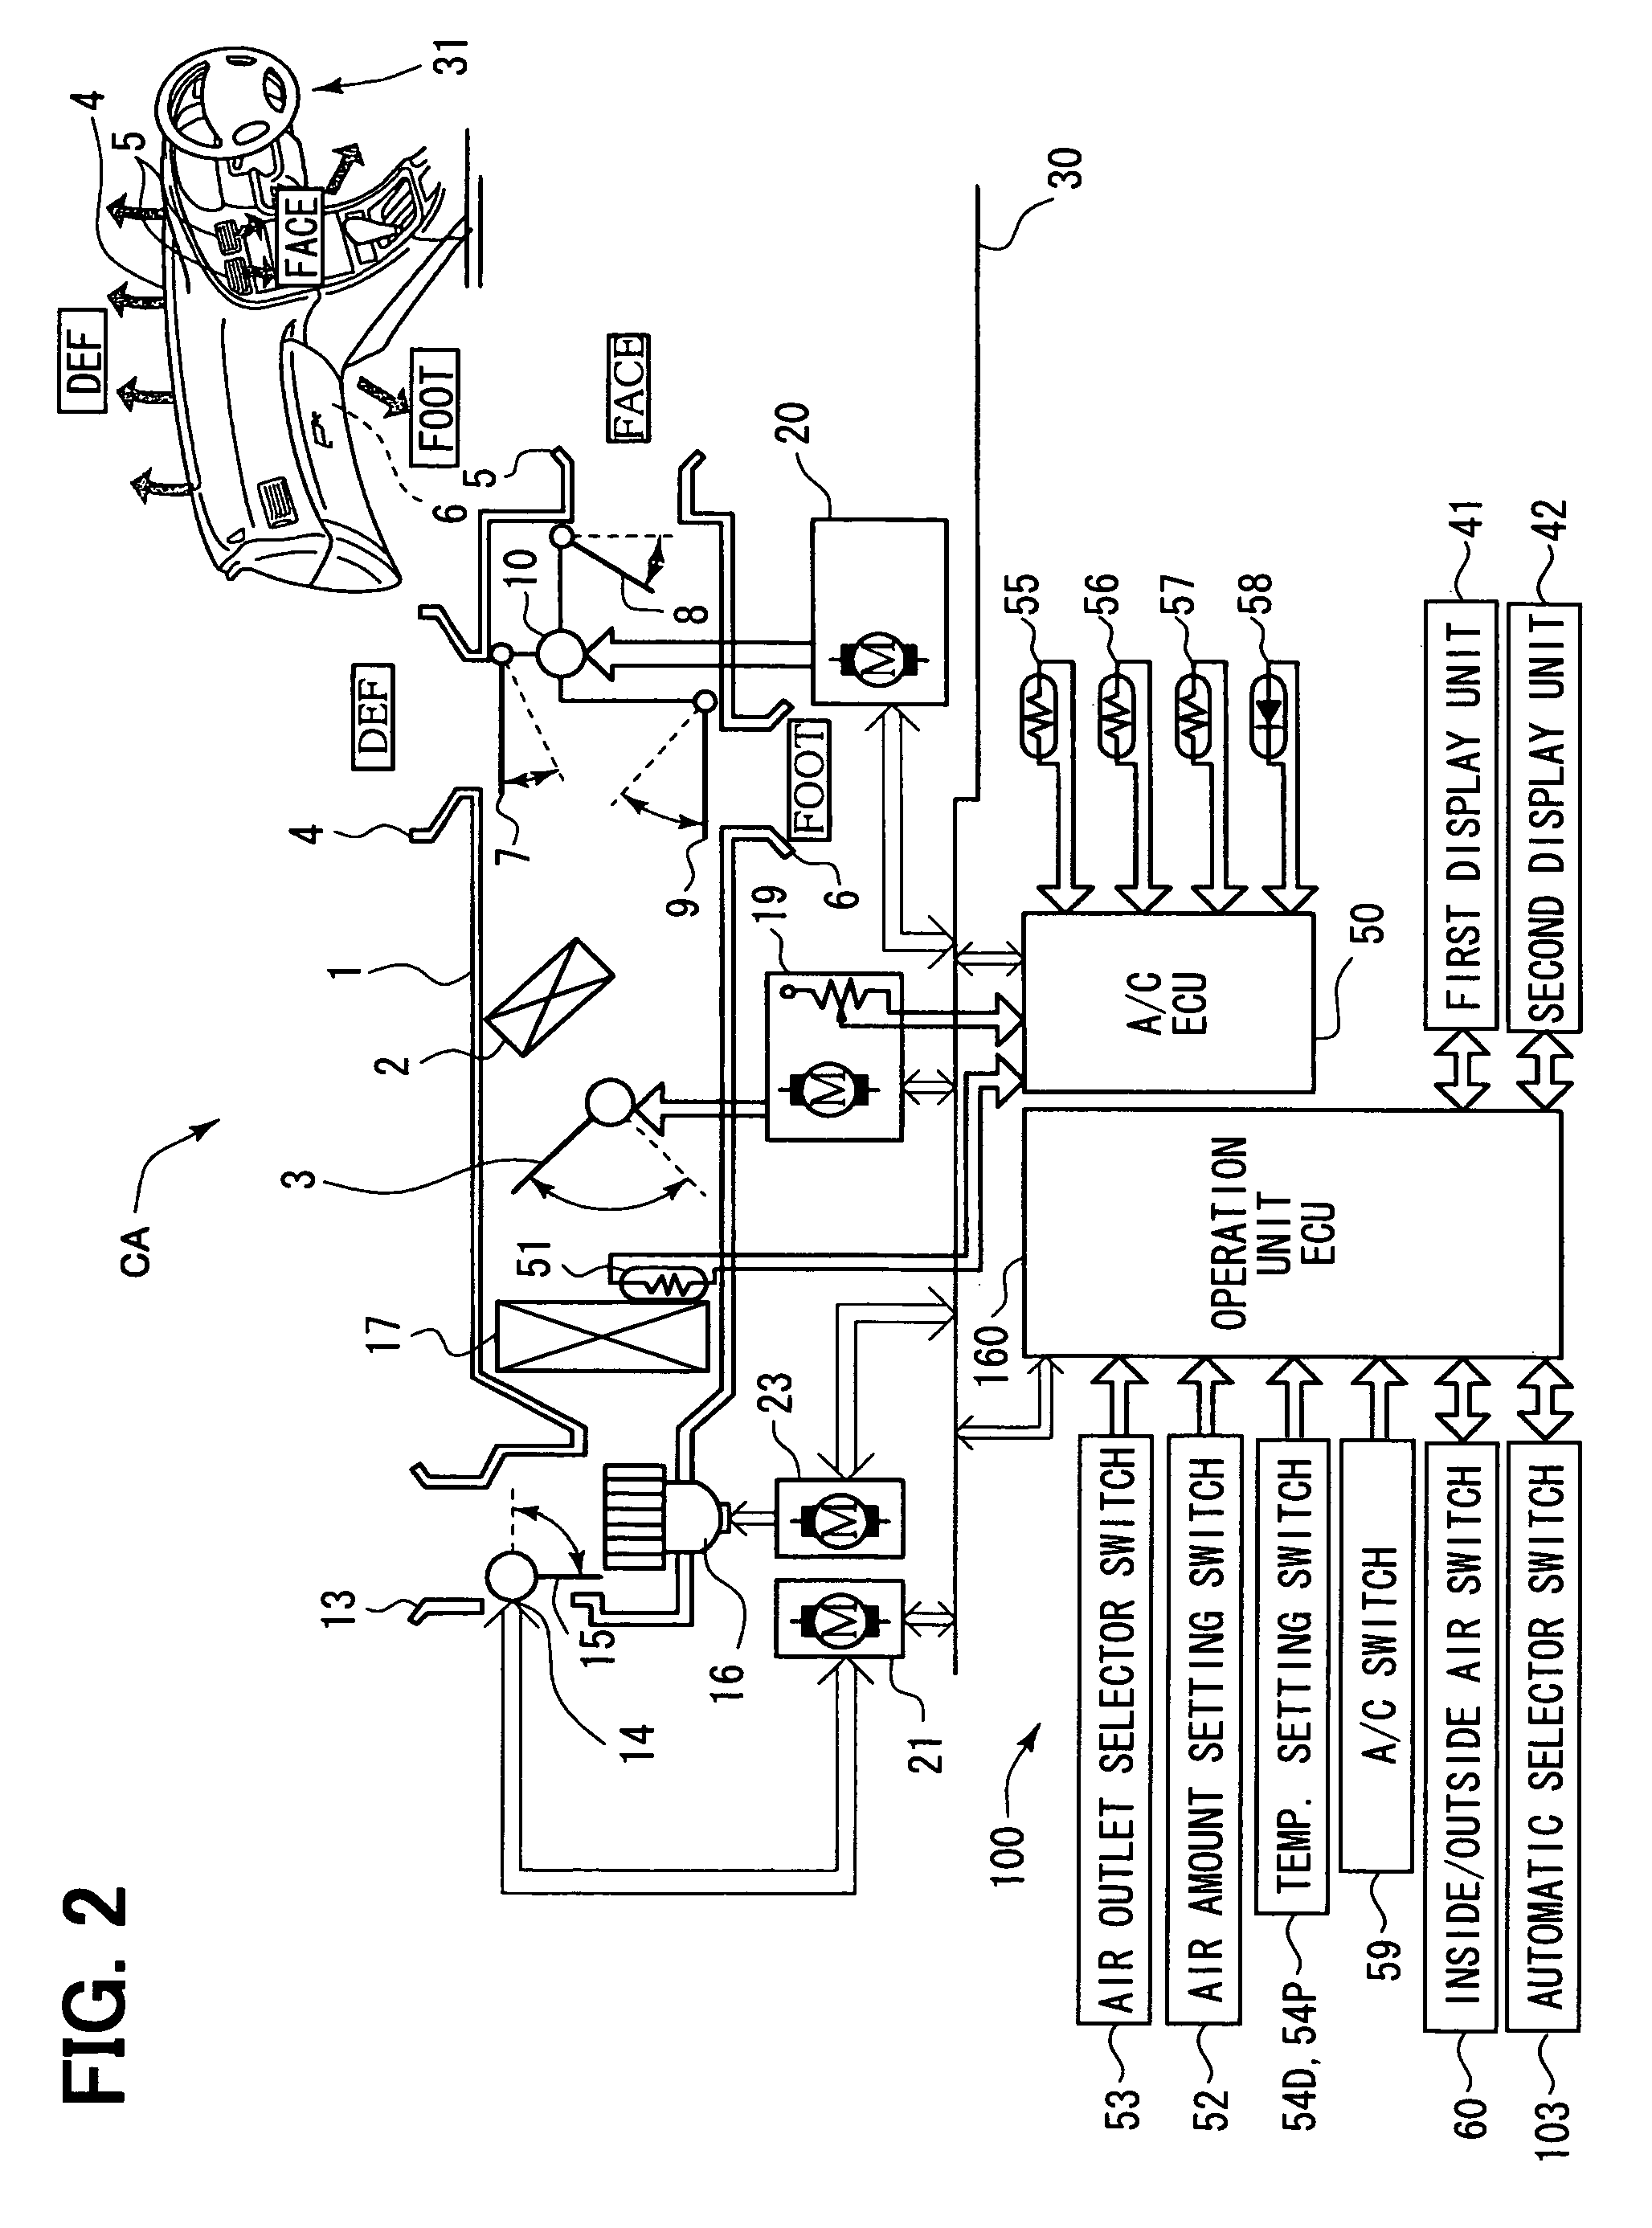 Operation unit for vehicle air conditioner and vehicle air-conditioning control apparatus using the same